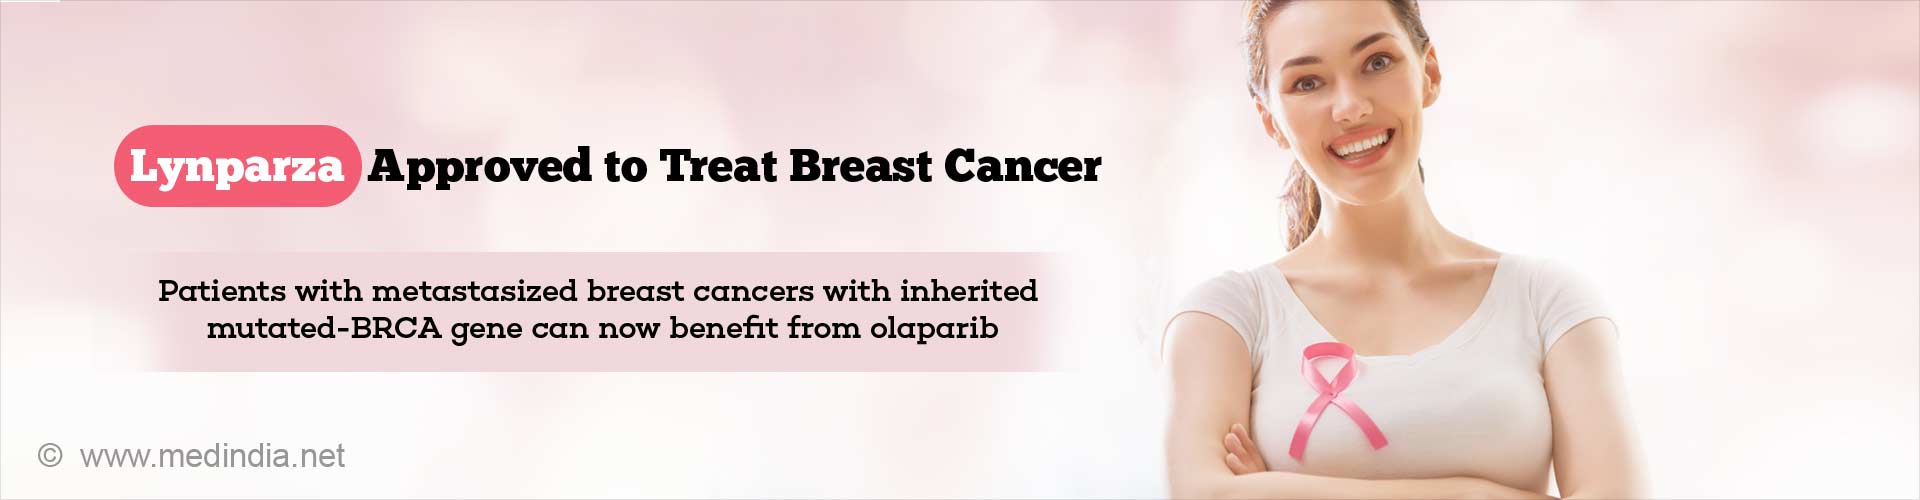 Lymparza approved to treat breast cancer
- patients with metastasized breast cancers with inherited mutated-BRCA gene can now benefit from olaparib